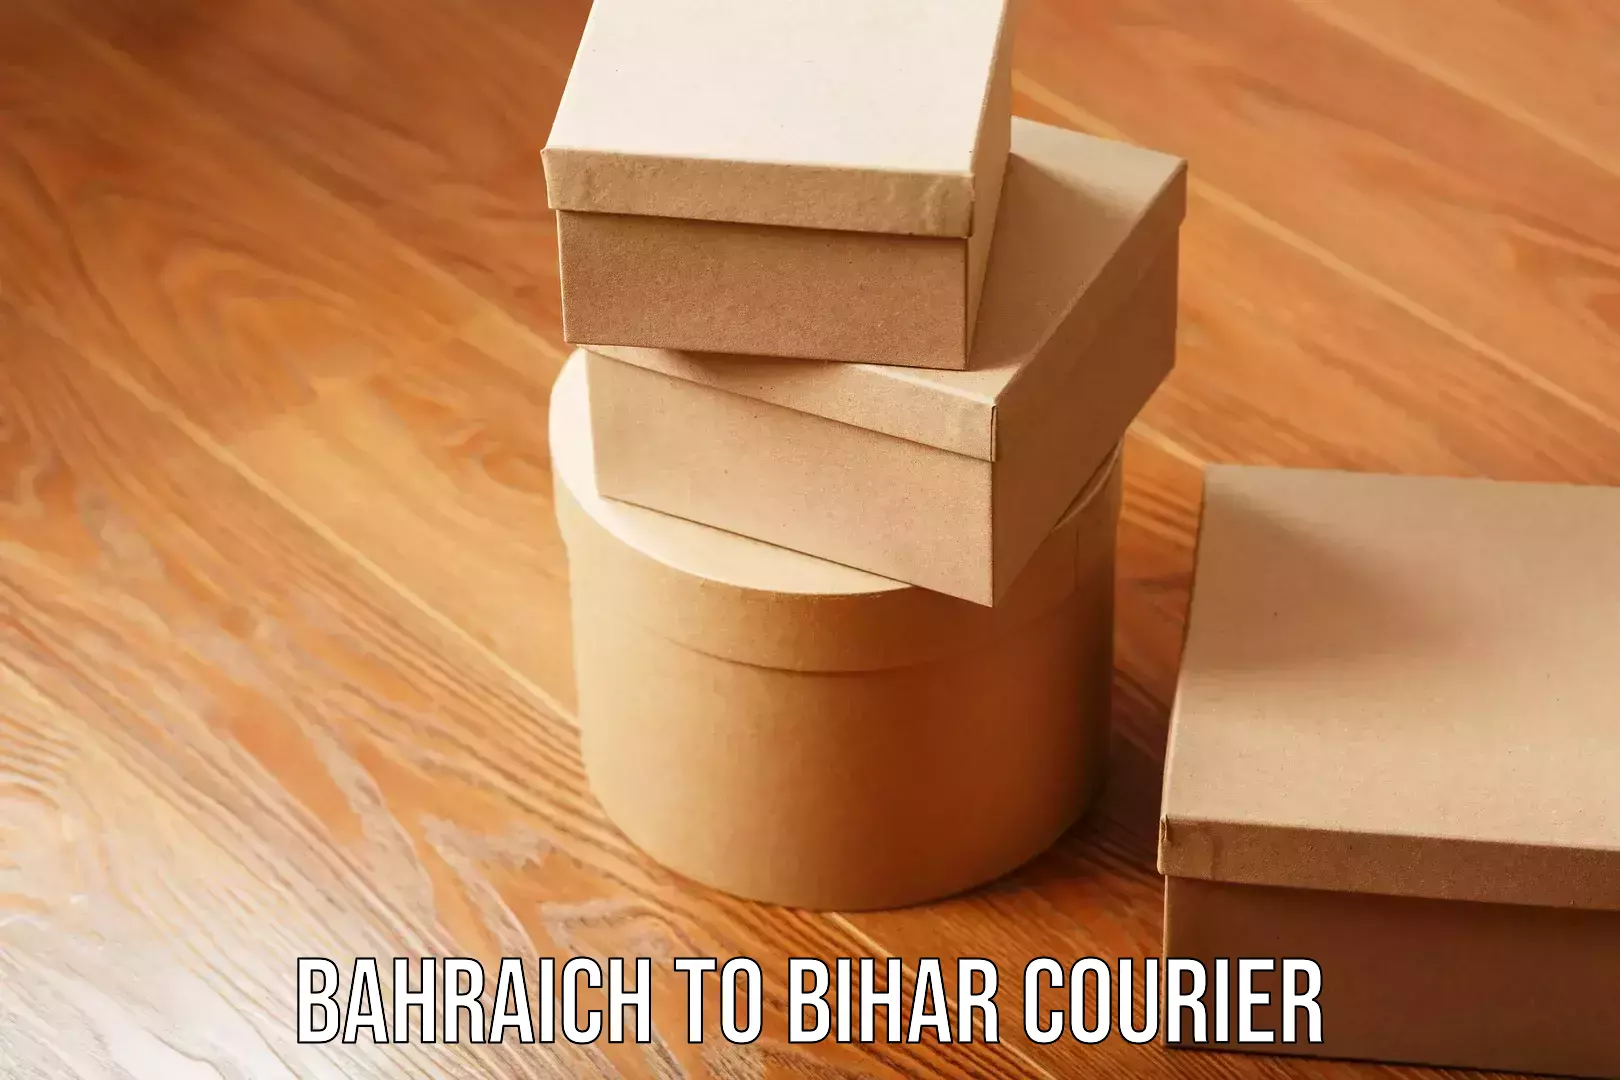 24-hour courier service Bahraich to Maheshkhunt